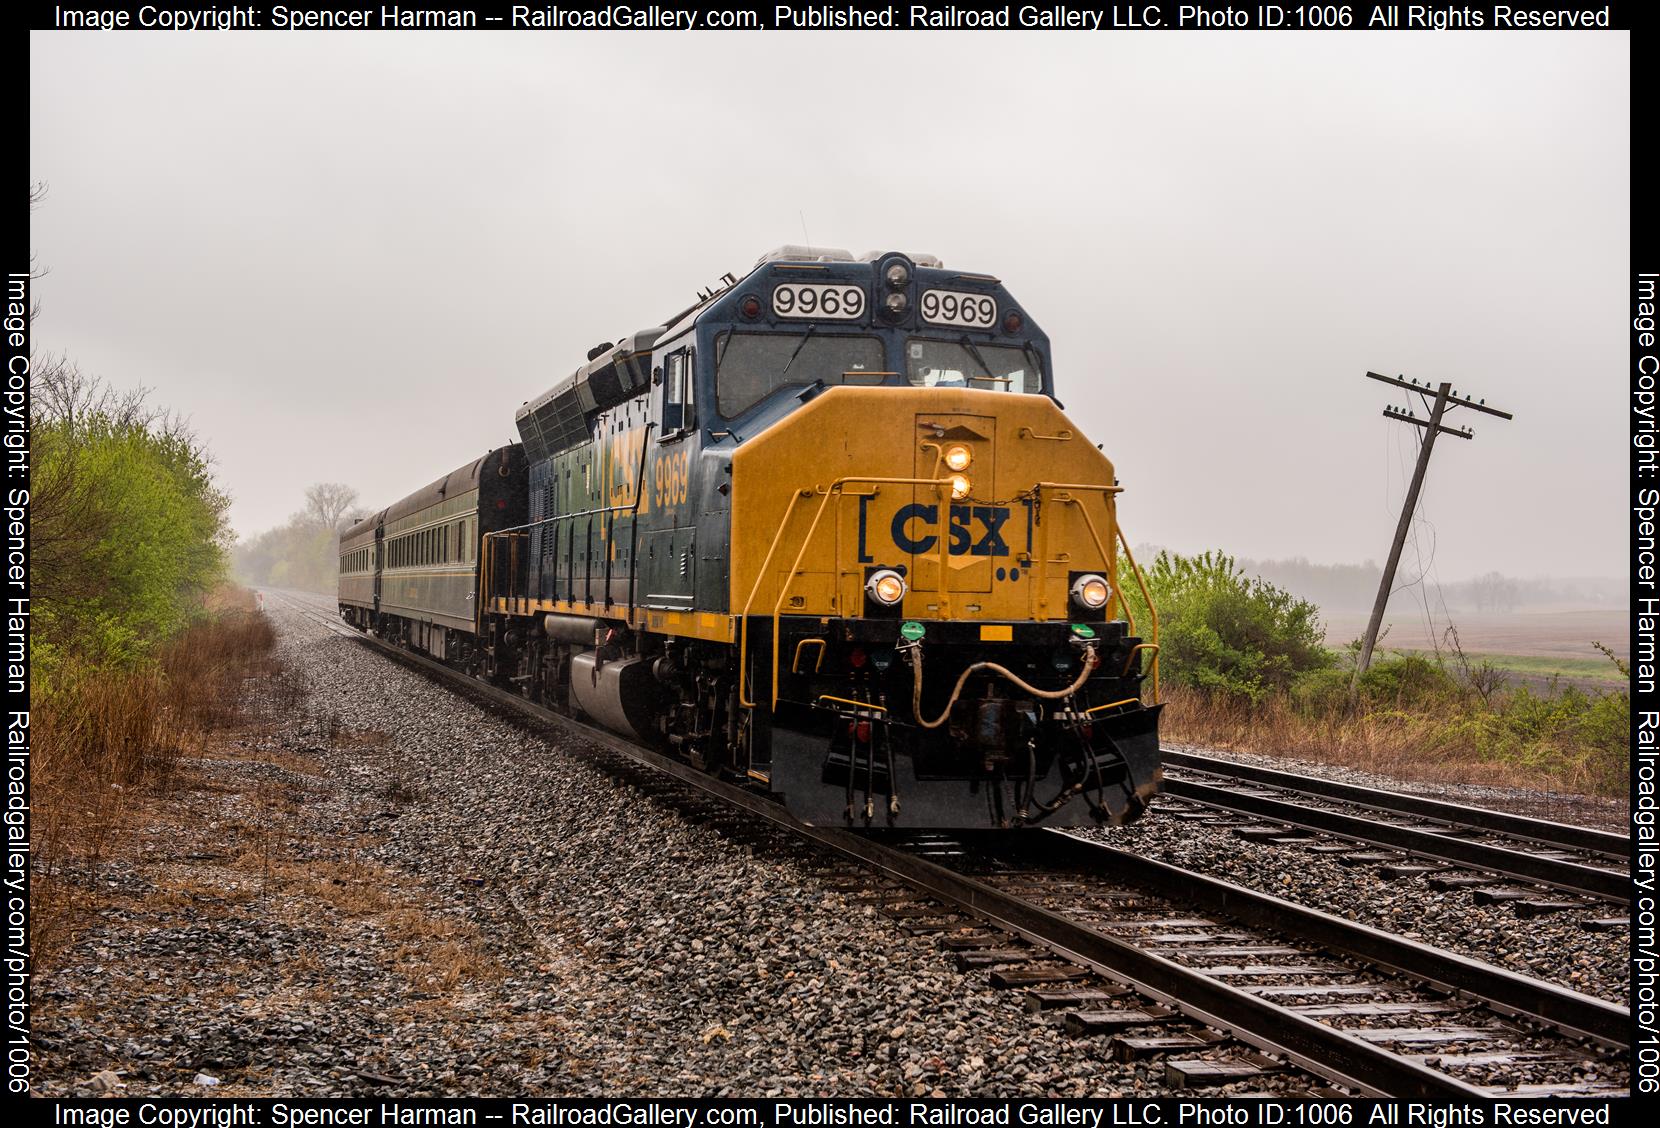 CSXT 9969 is a class EMD GP40WH-2 and  is pictured in Ripley, Indiana, USA.  This was taken along the Garrett Subdivision on the CSX Transportation. Photo Copyright: Spencer Harman uploaded to Railroad Gallery on 04/28/2023. This photograph of CSXT 9969 was taken on Friday, April 28, 2023. All Rights Reserved. 